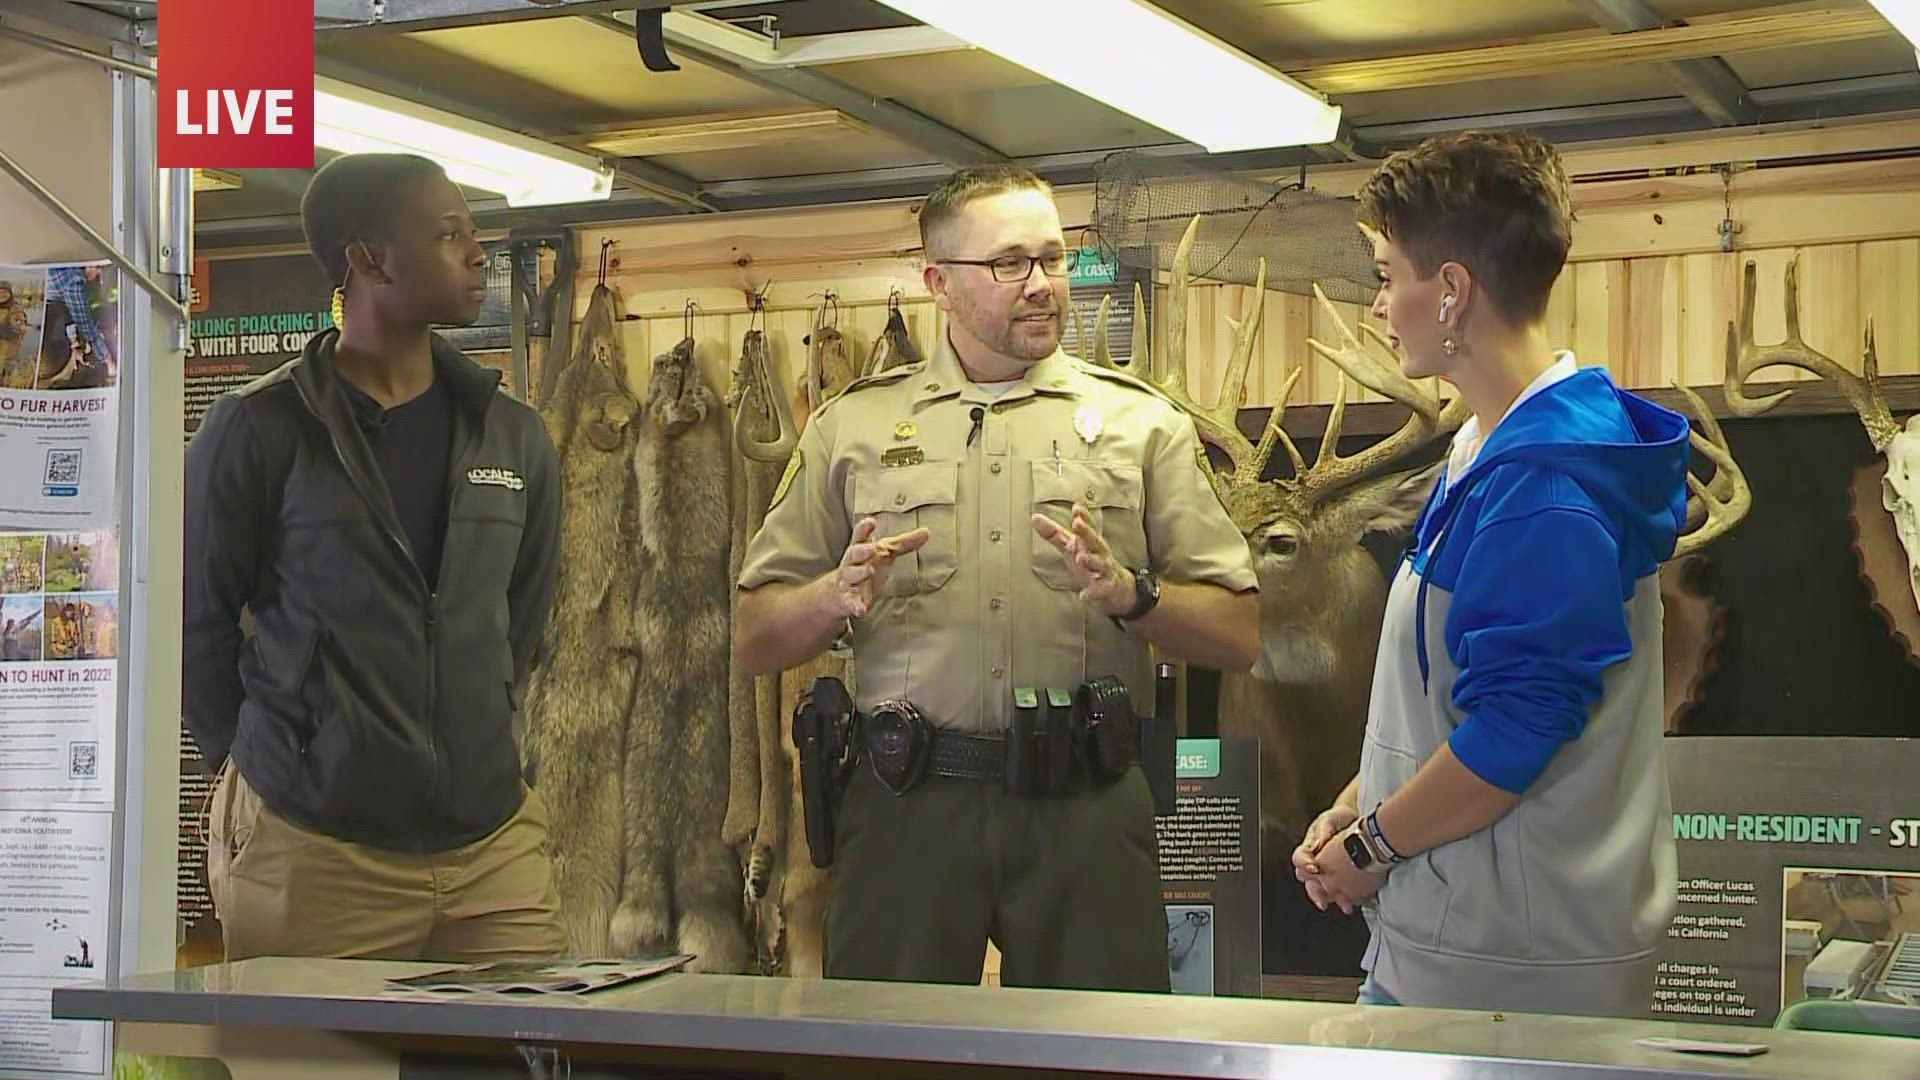 While the only thing you might be hunting at the fair is a corndog, Iowa Conservation Officer Dustin Eighmy has some real hunting safety tips you'll need this year.